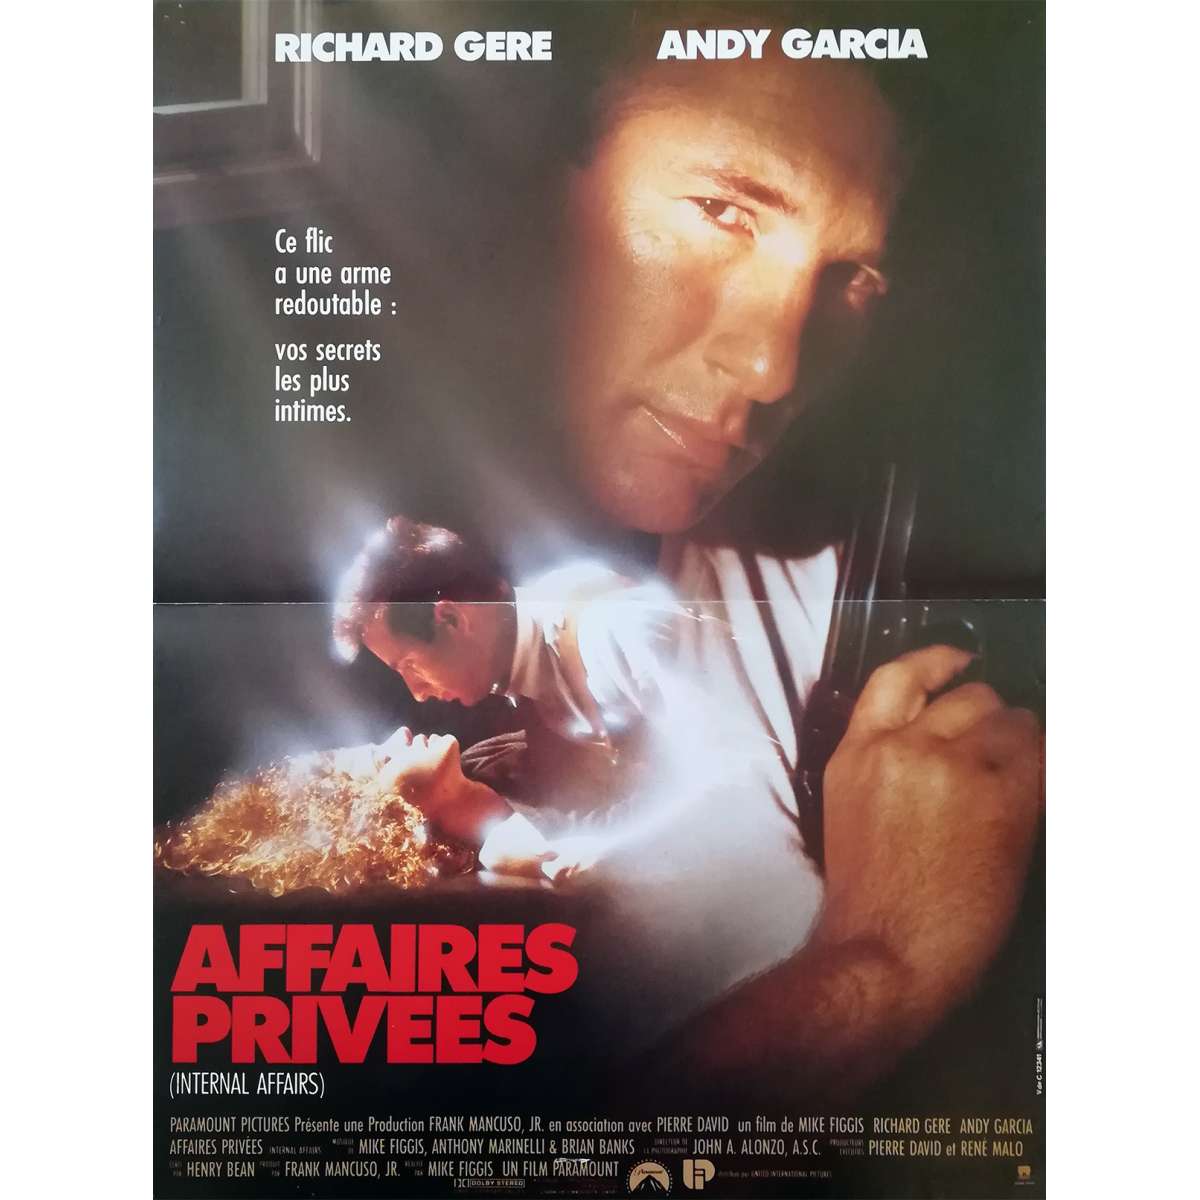 INTERNAL AFFAIRS Movie Poster 15x21 in.